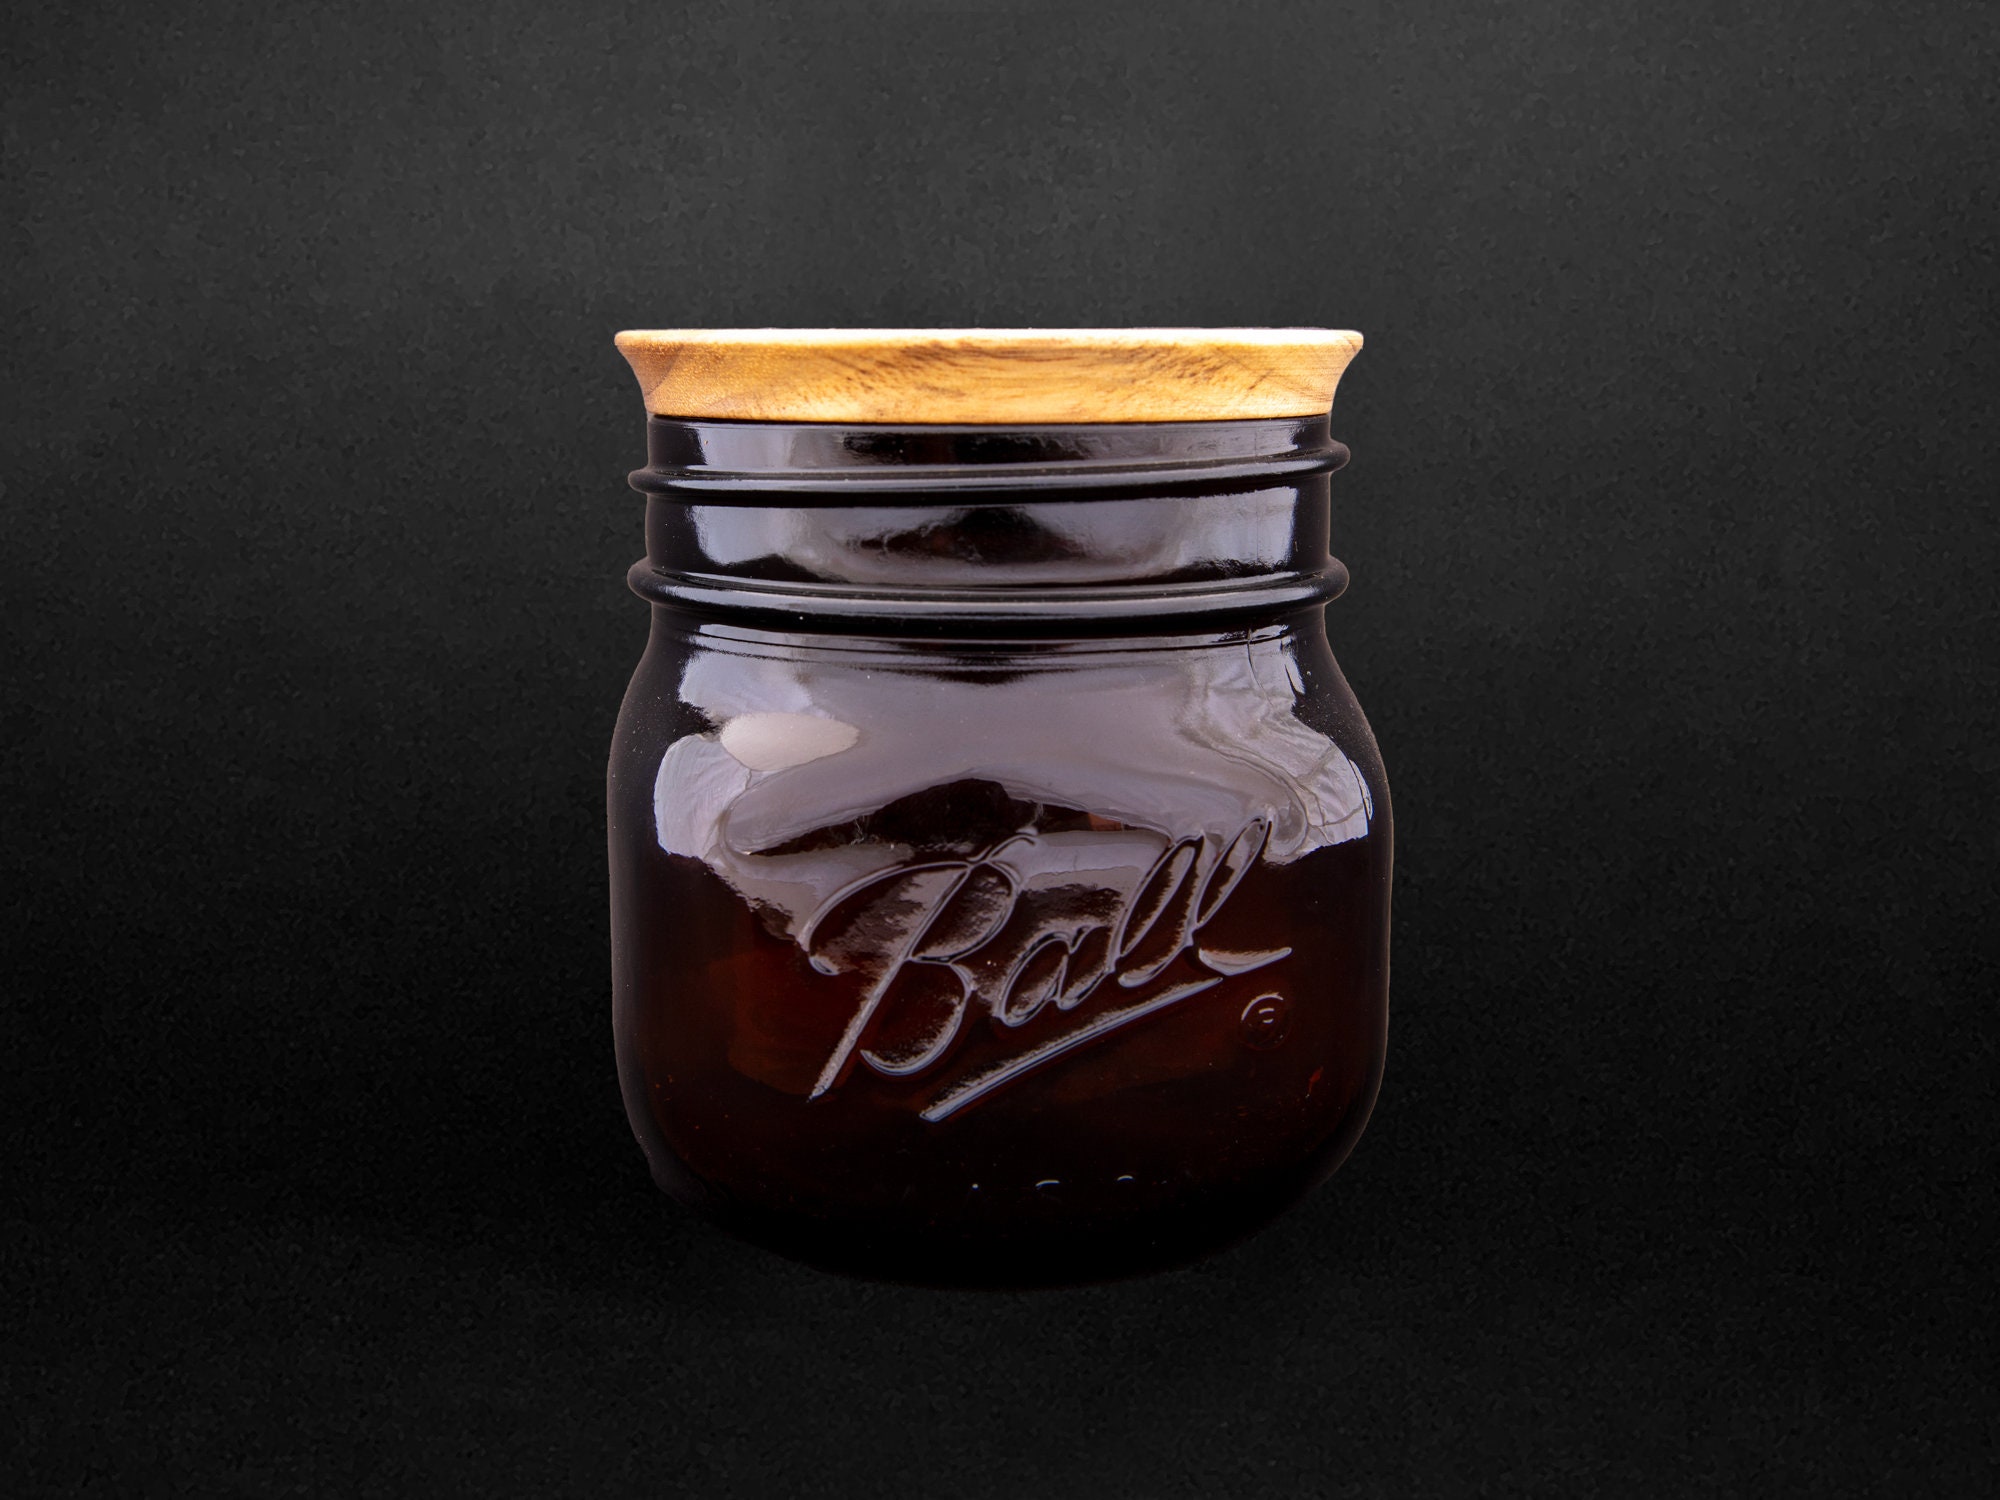 Ball Amber Glass Wide Mouth Mason Jars (16 oz/Pint) With Airtight lids and  Bands [4 Pack] Amber Canning Jars - Microwave & Dishwasher Safe. Bundled  With Jar Opener